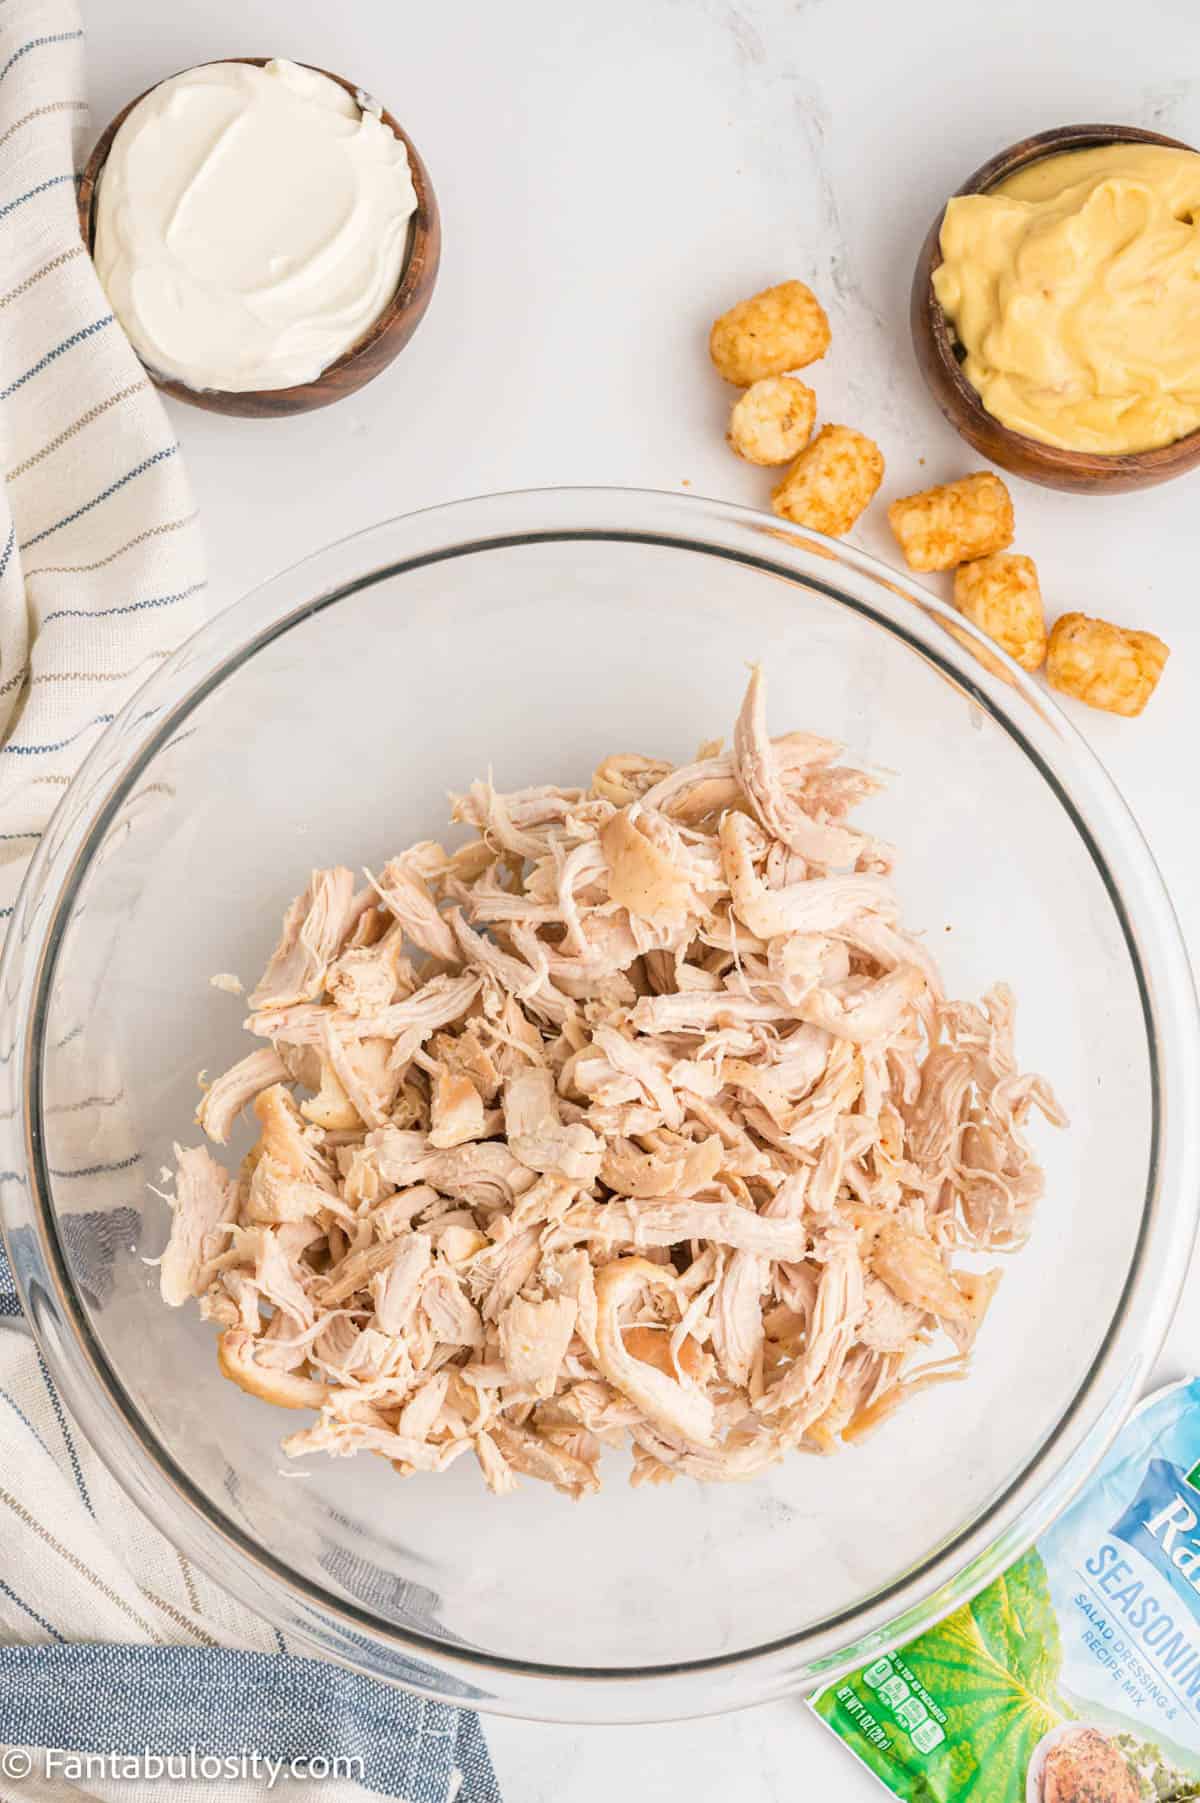 Cooked shredded chicken is in a large glass mixing bowl